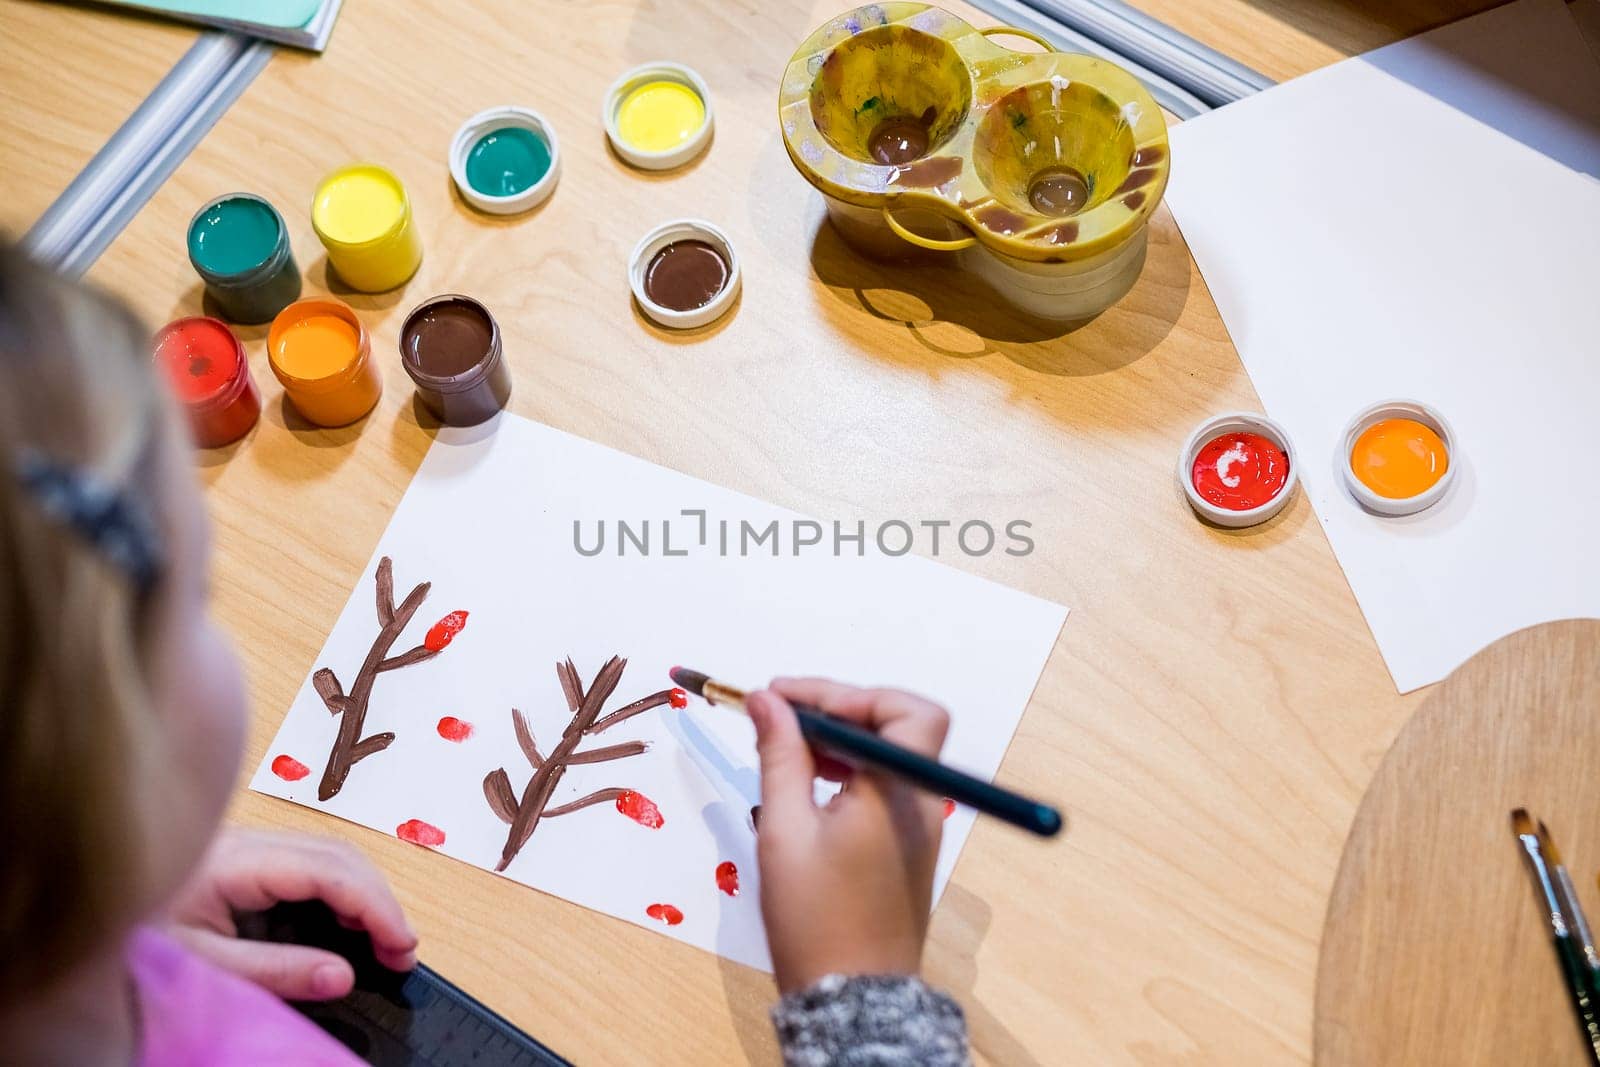 Child drawing picture with crayon in album using a lot of painting tools. Creativity concept.